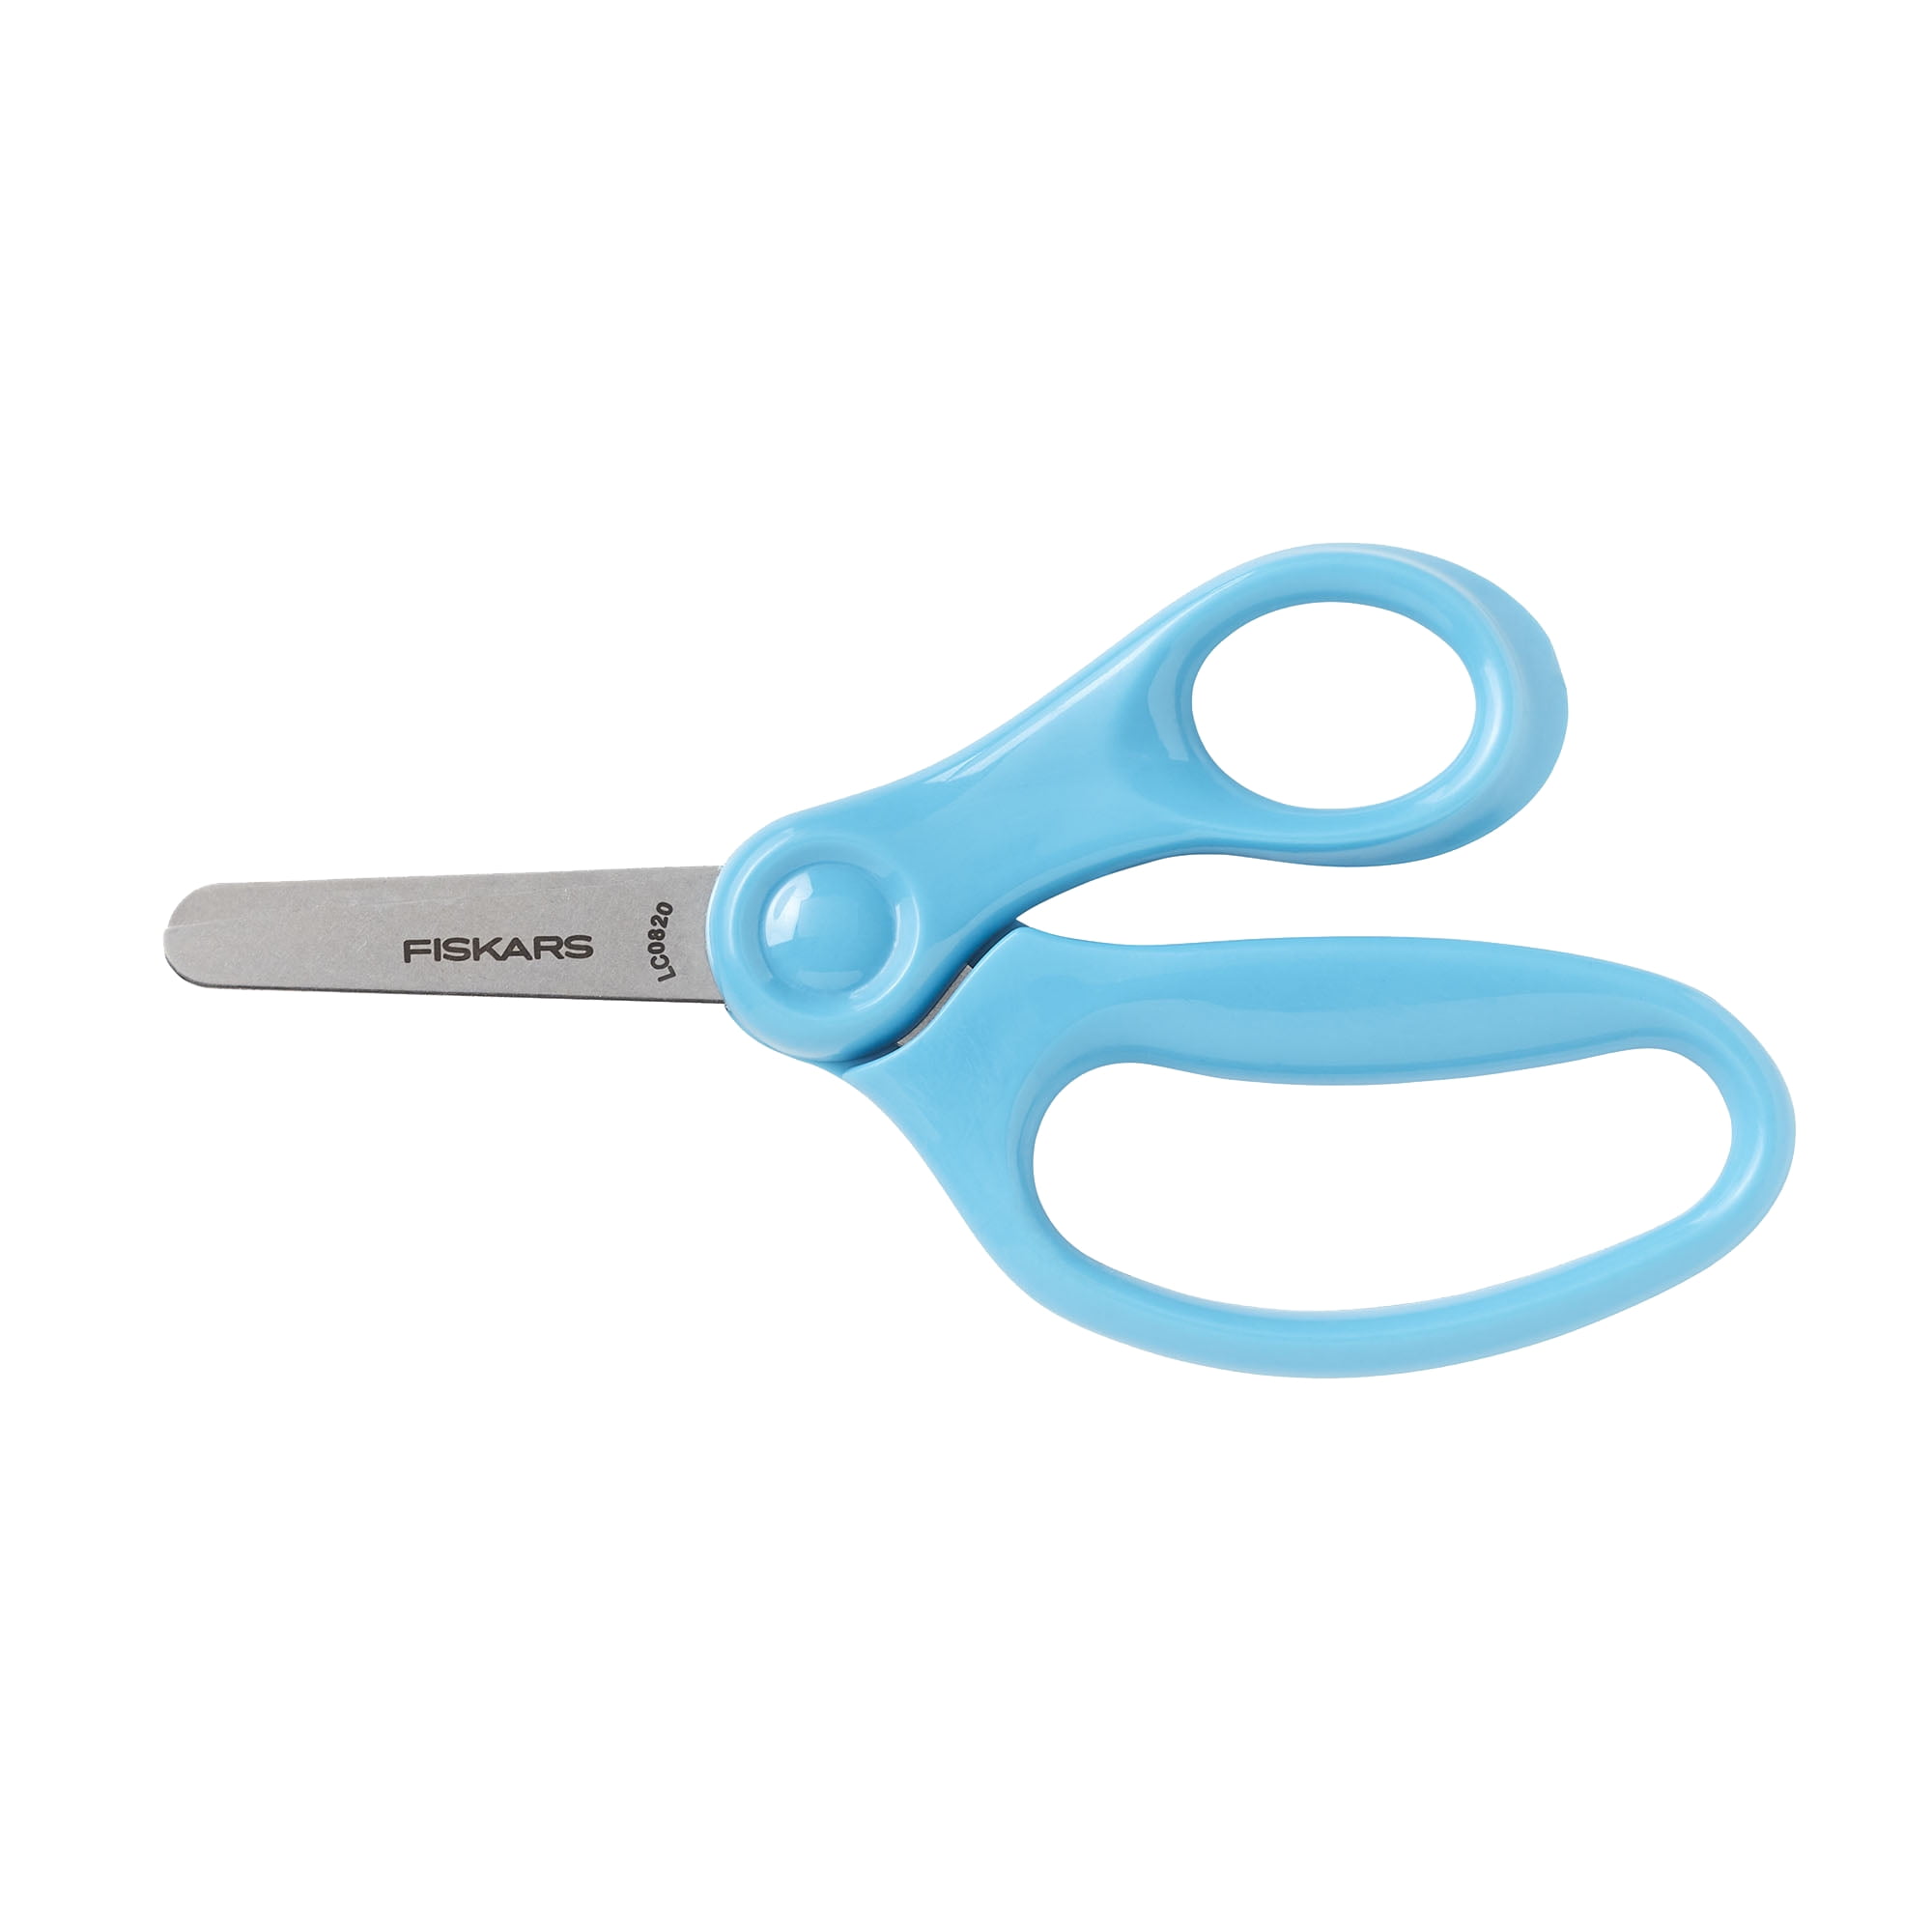 Children's Safety Scissors Maped Kidicut Turquoise Blue 12cm / 4.5 Inch  Right-handed Kid's Arts & Crafts Ages 2 Stationery -  Finland